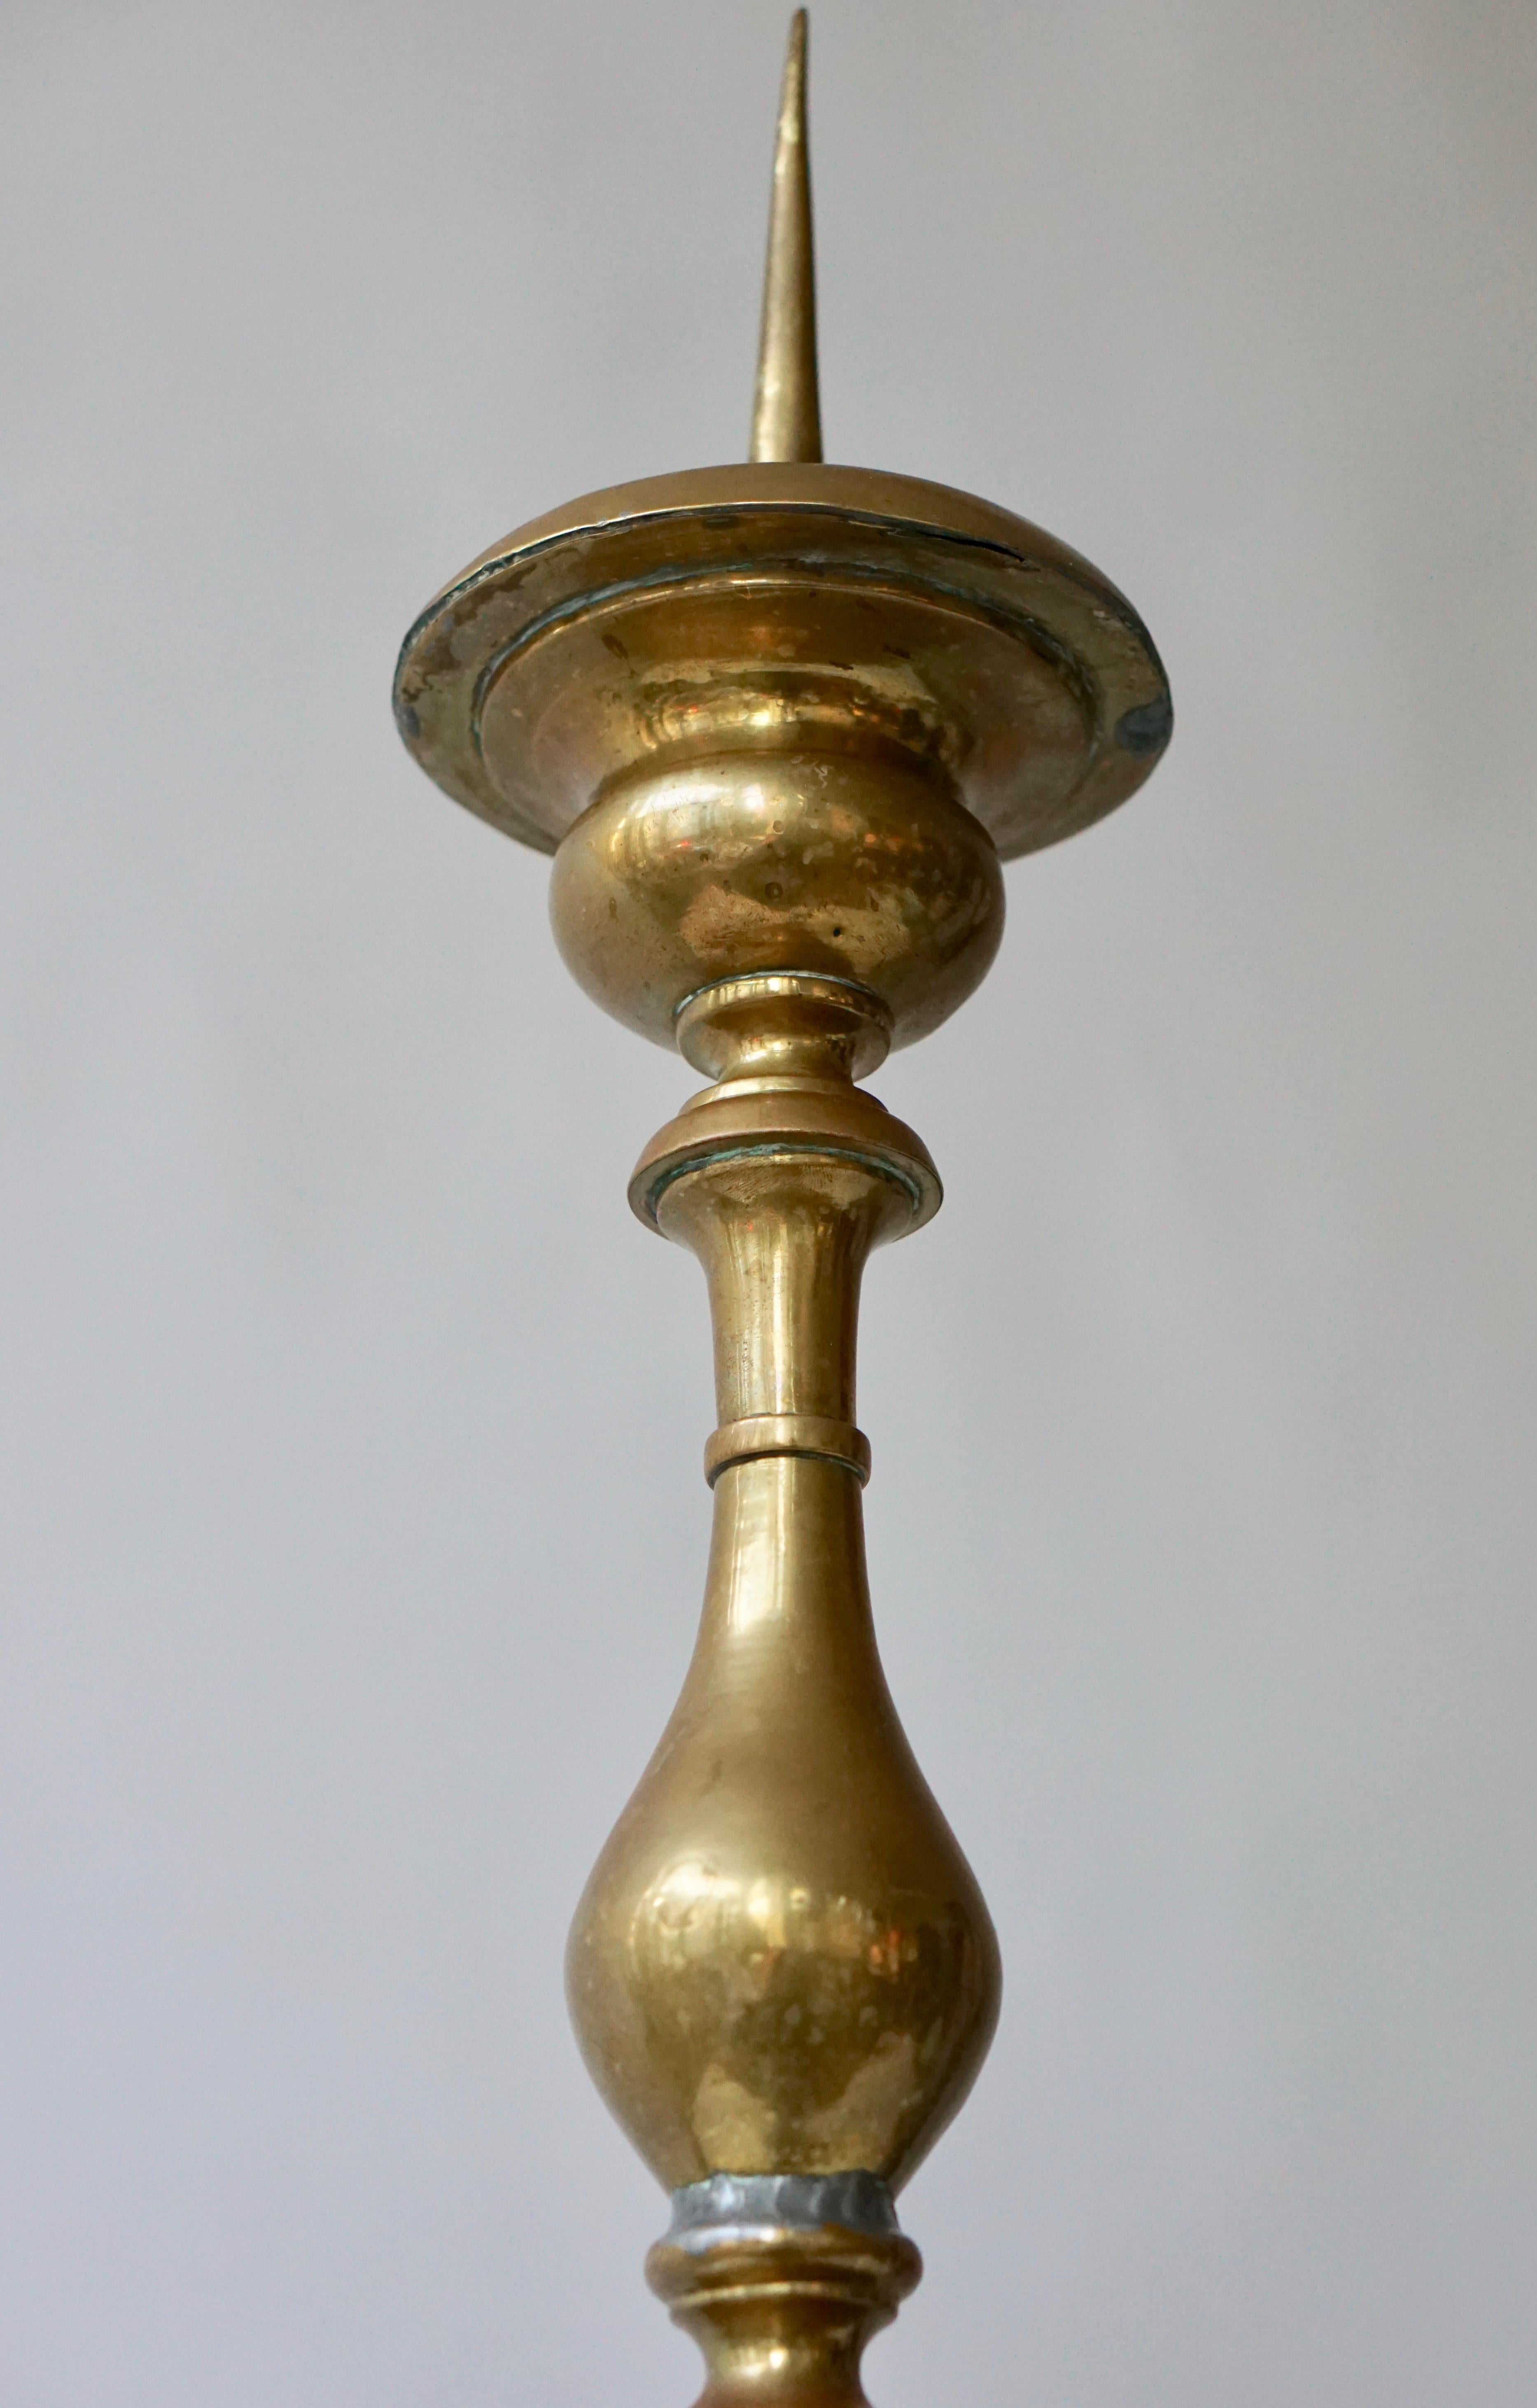 Polished Brass Tall Torchere, Candlestick or Prickets, 19th Century For Sale 7